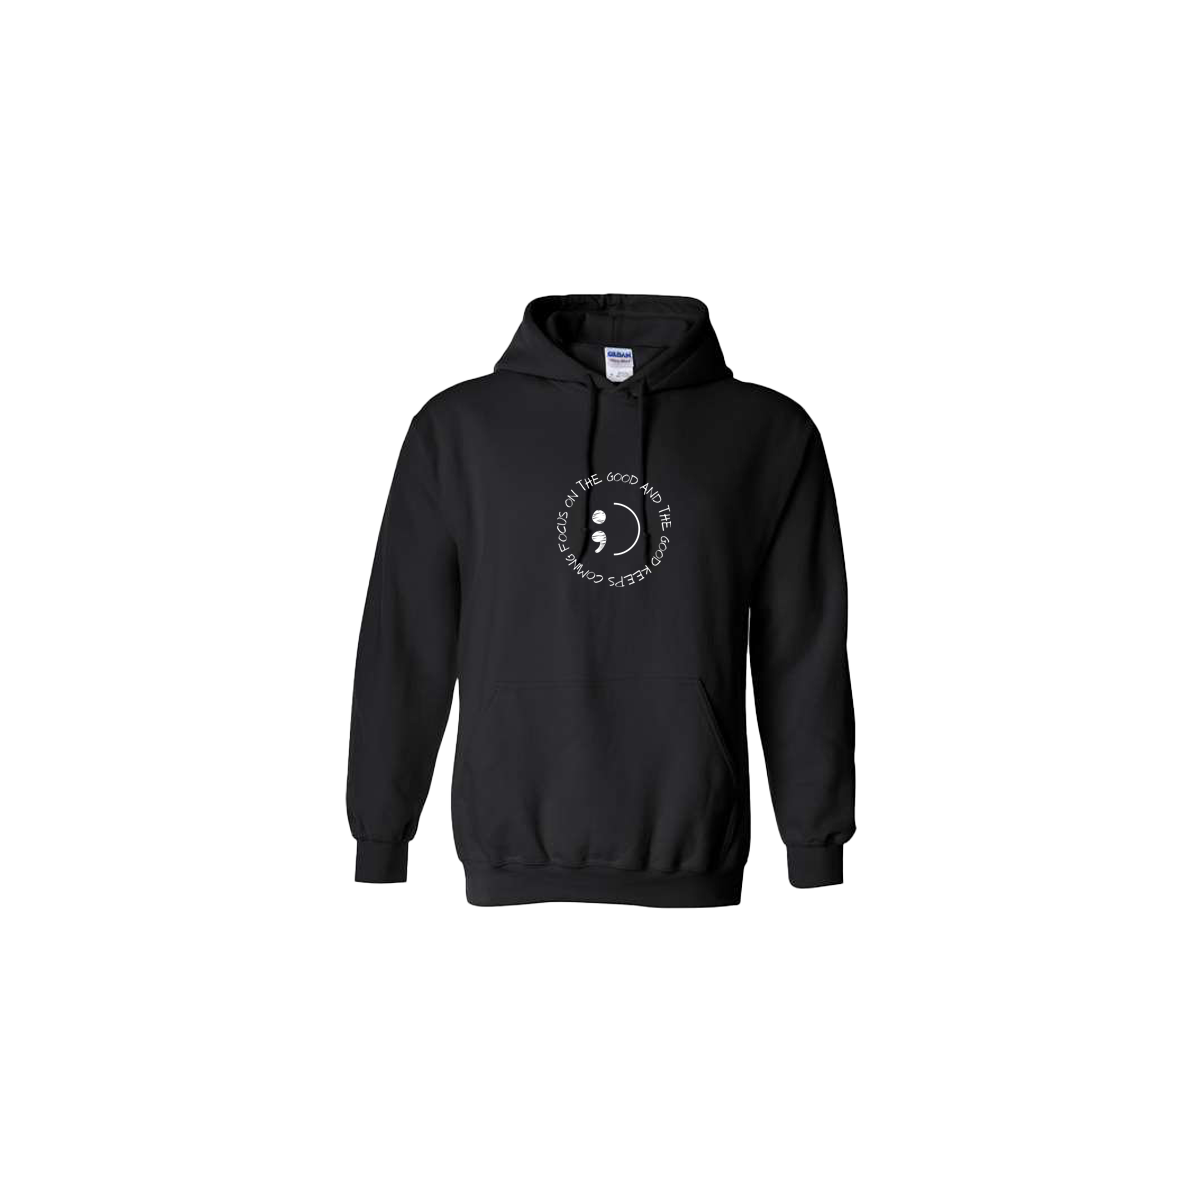 Focus on The Good And The Good Keeps Coming Embroidered Black Hoodie - Mental Health Awareness Clothing